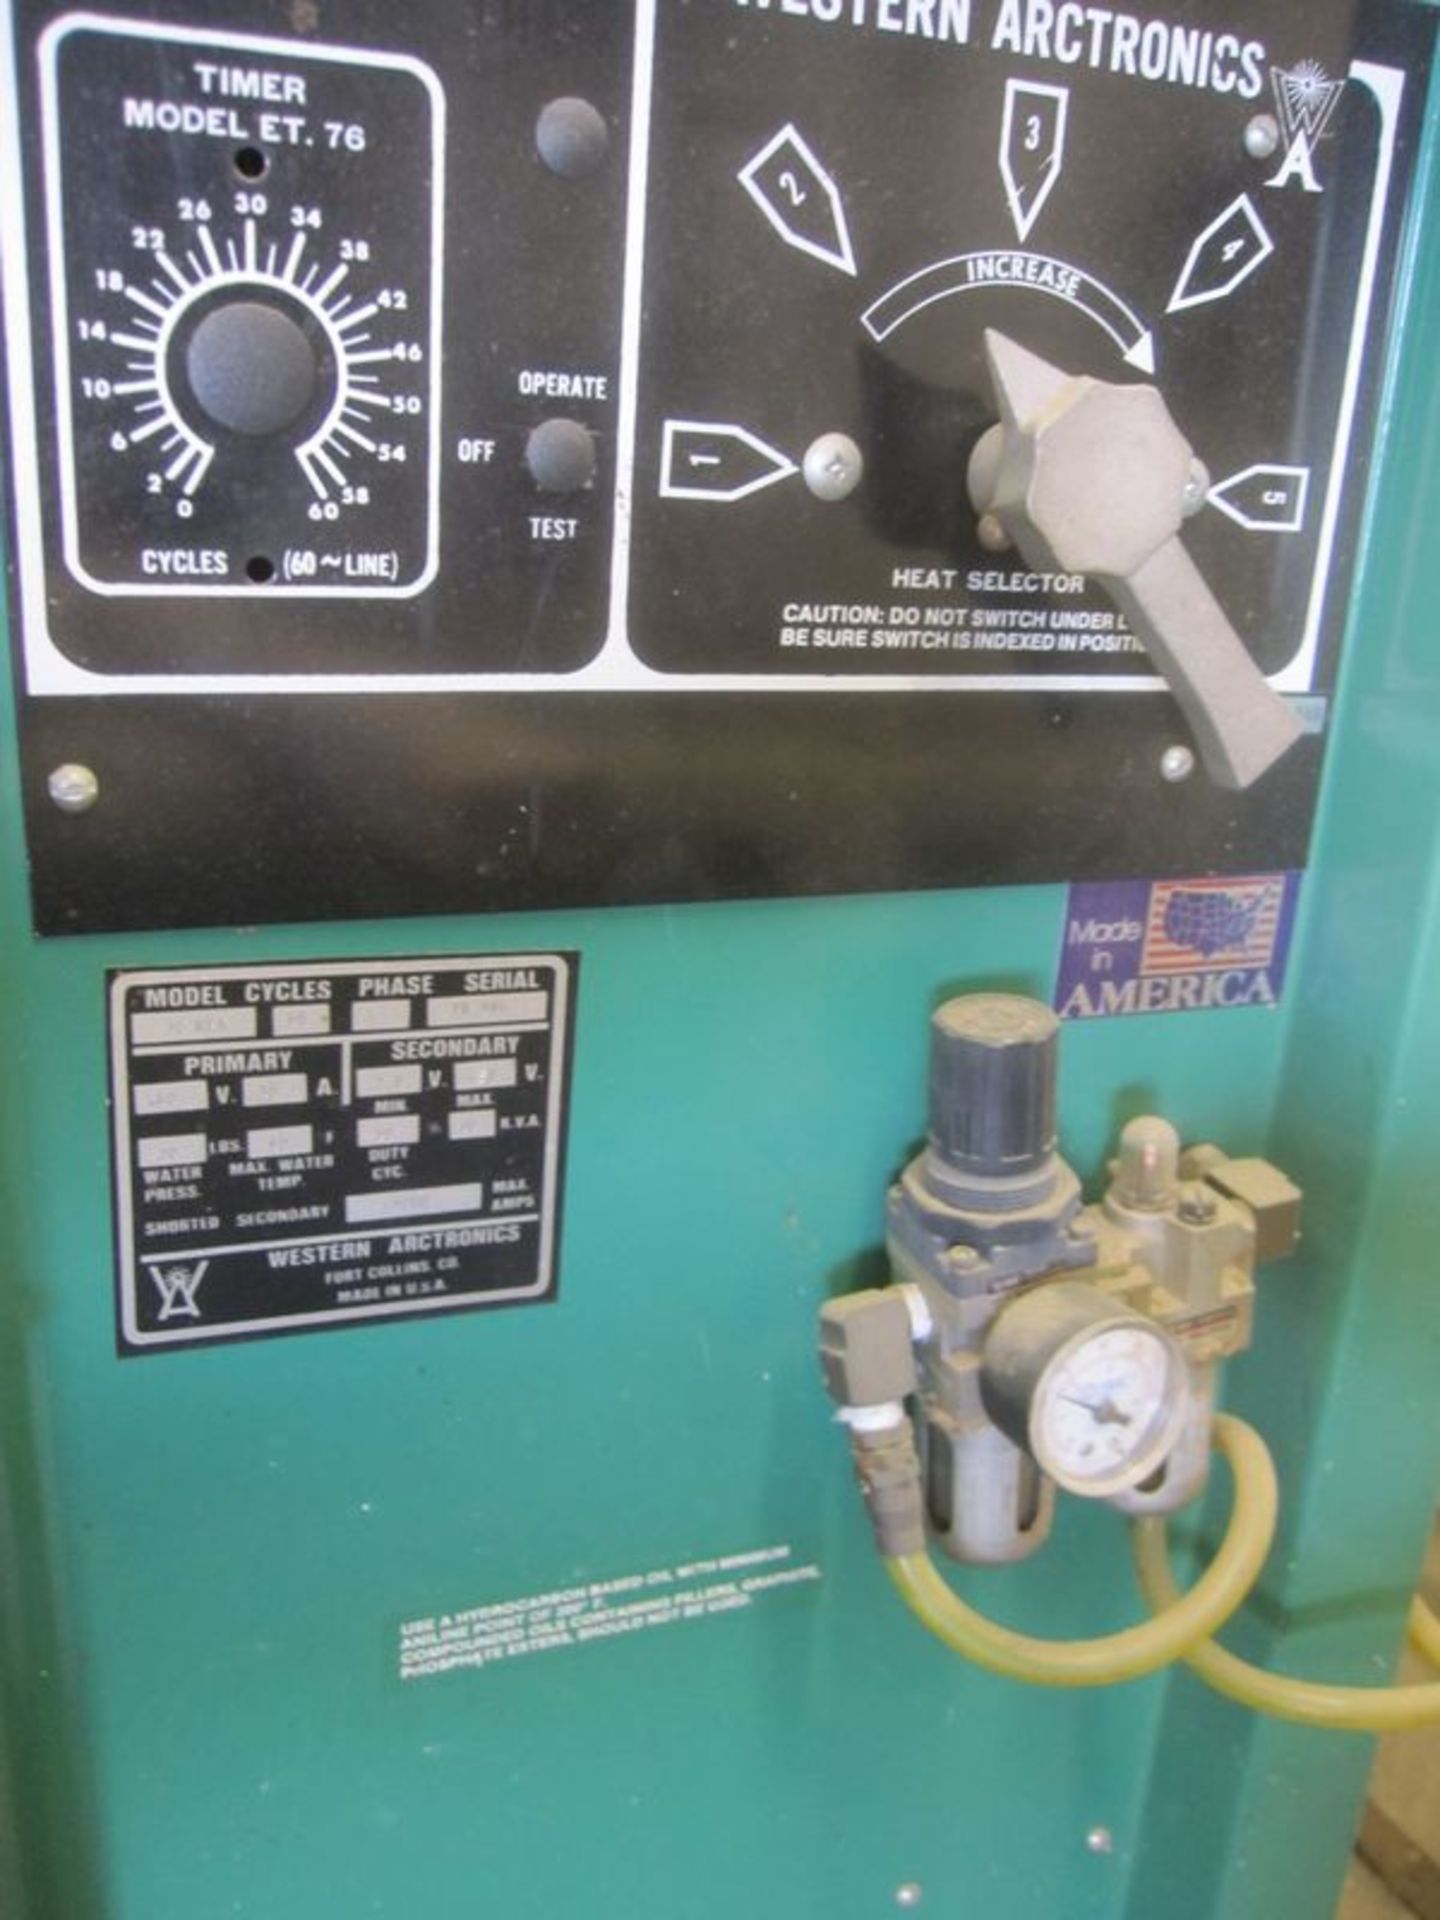 Western Arctronics Model 30KVA  Spot Welder , Serial Number: FK986 60 Cycles 1 Phase, Primary: 60V - Image 4 of 5